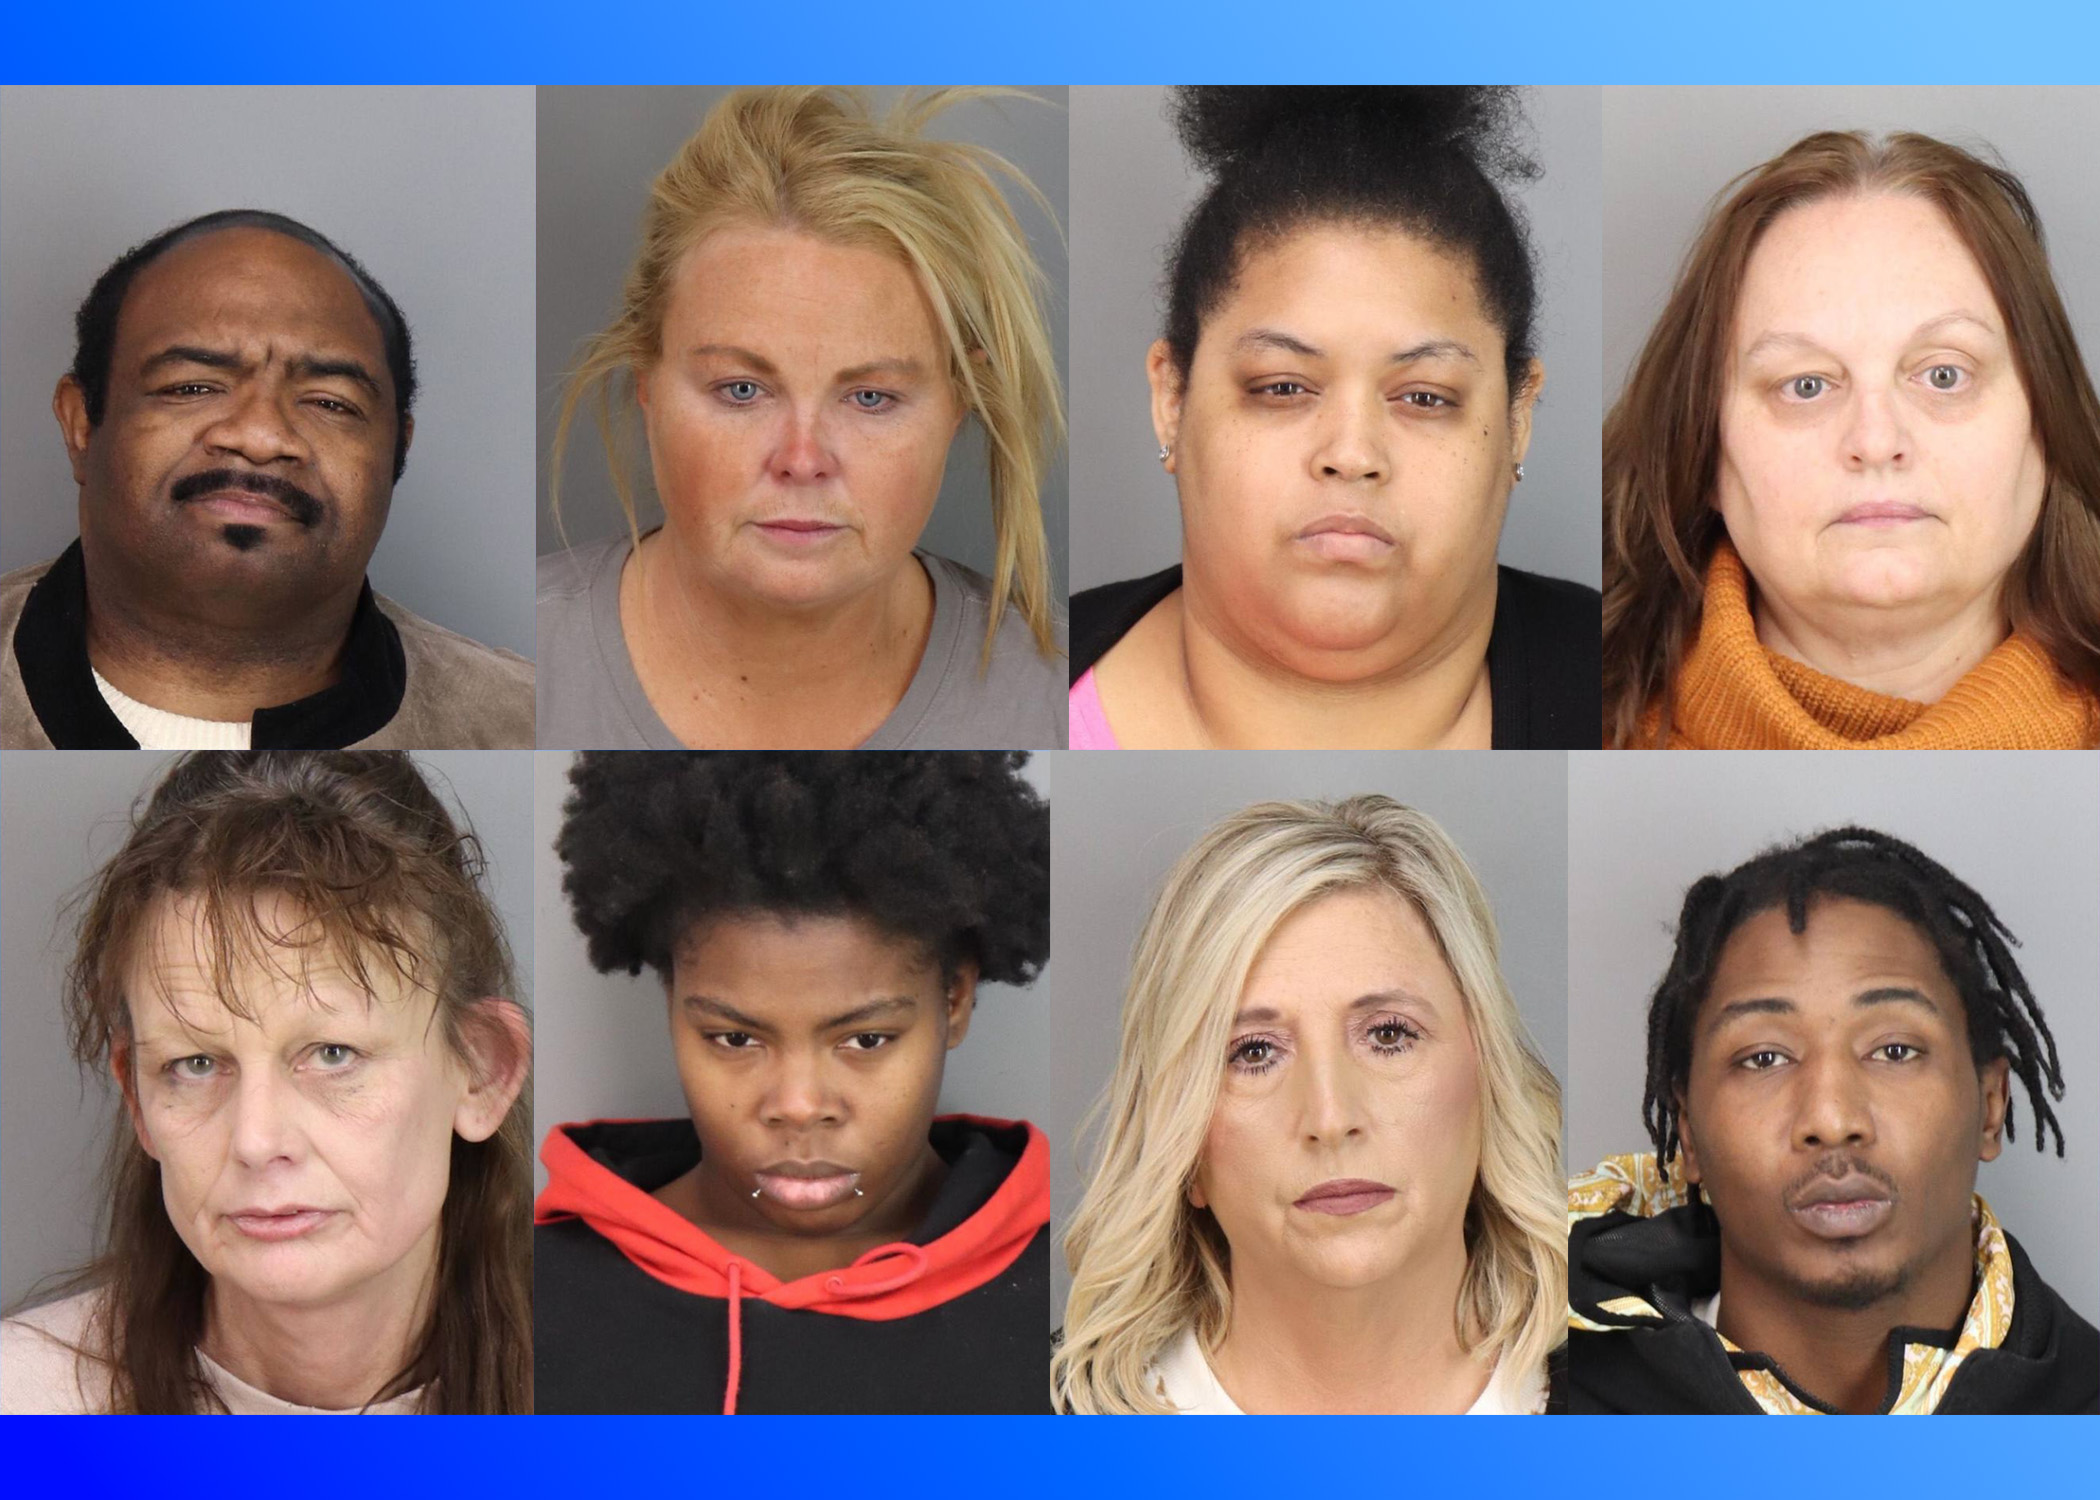 8 arrested for shoplifting in Trussville